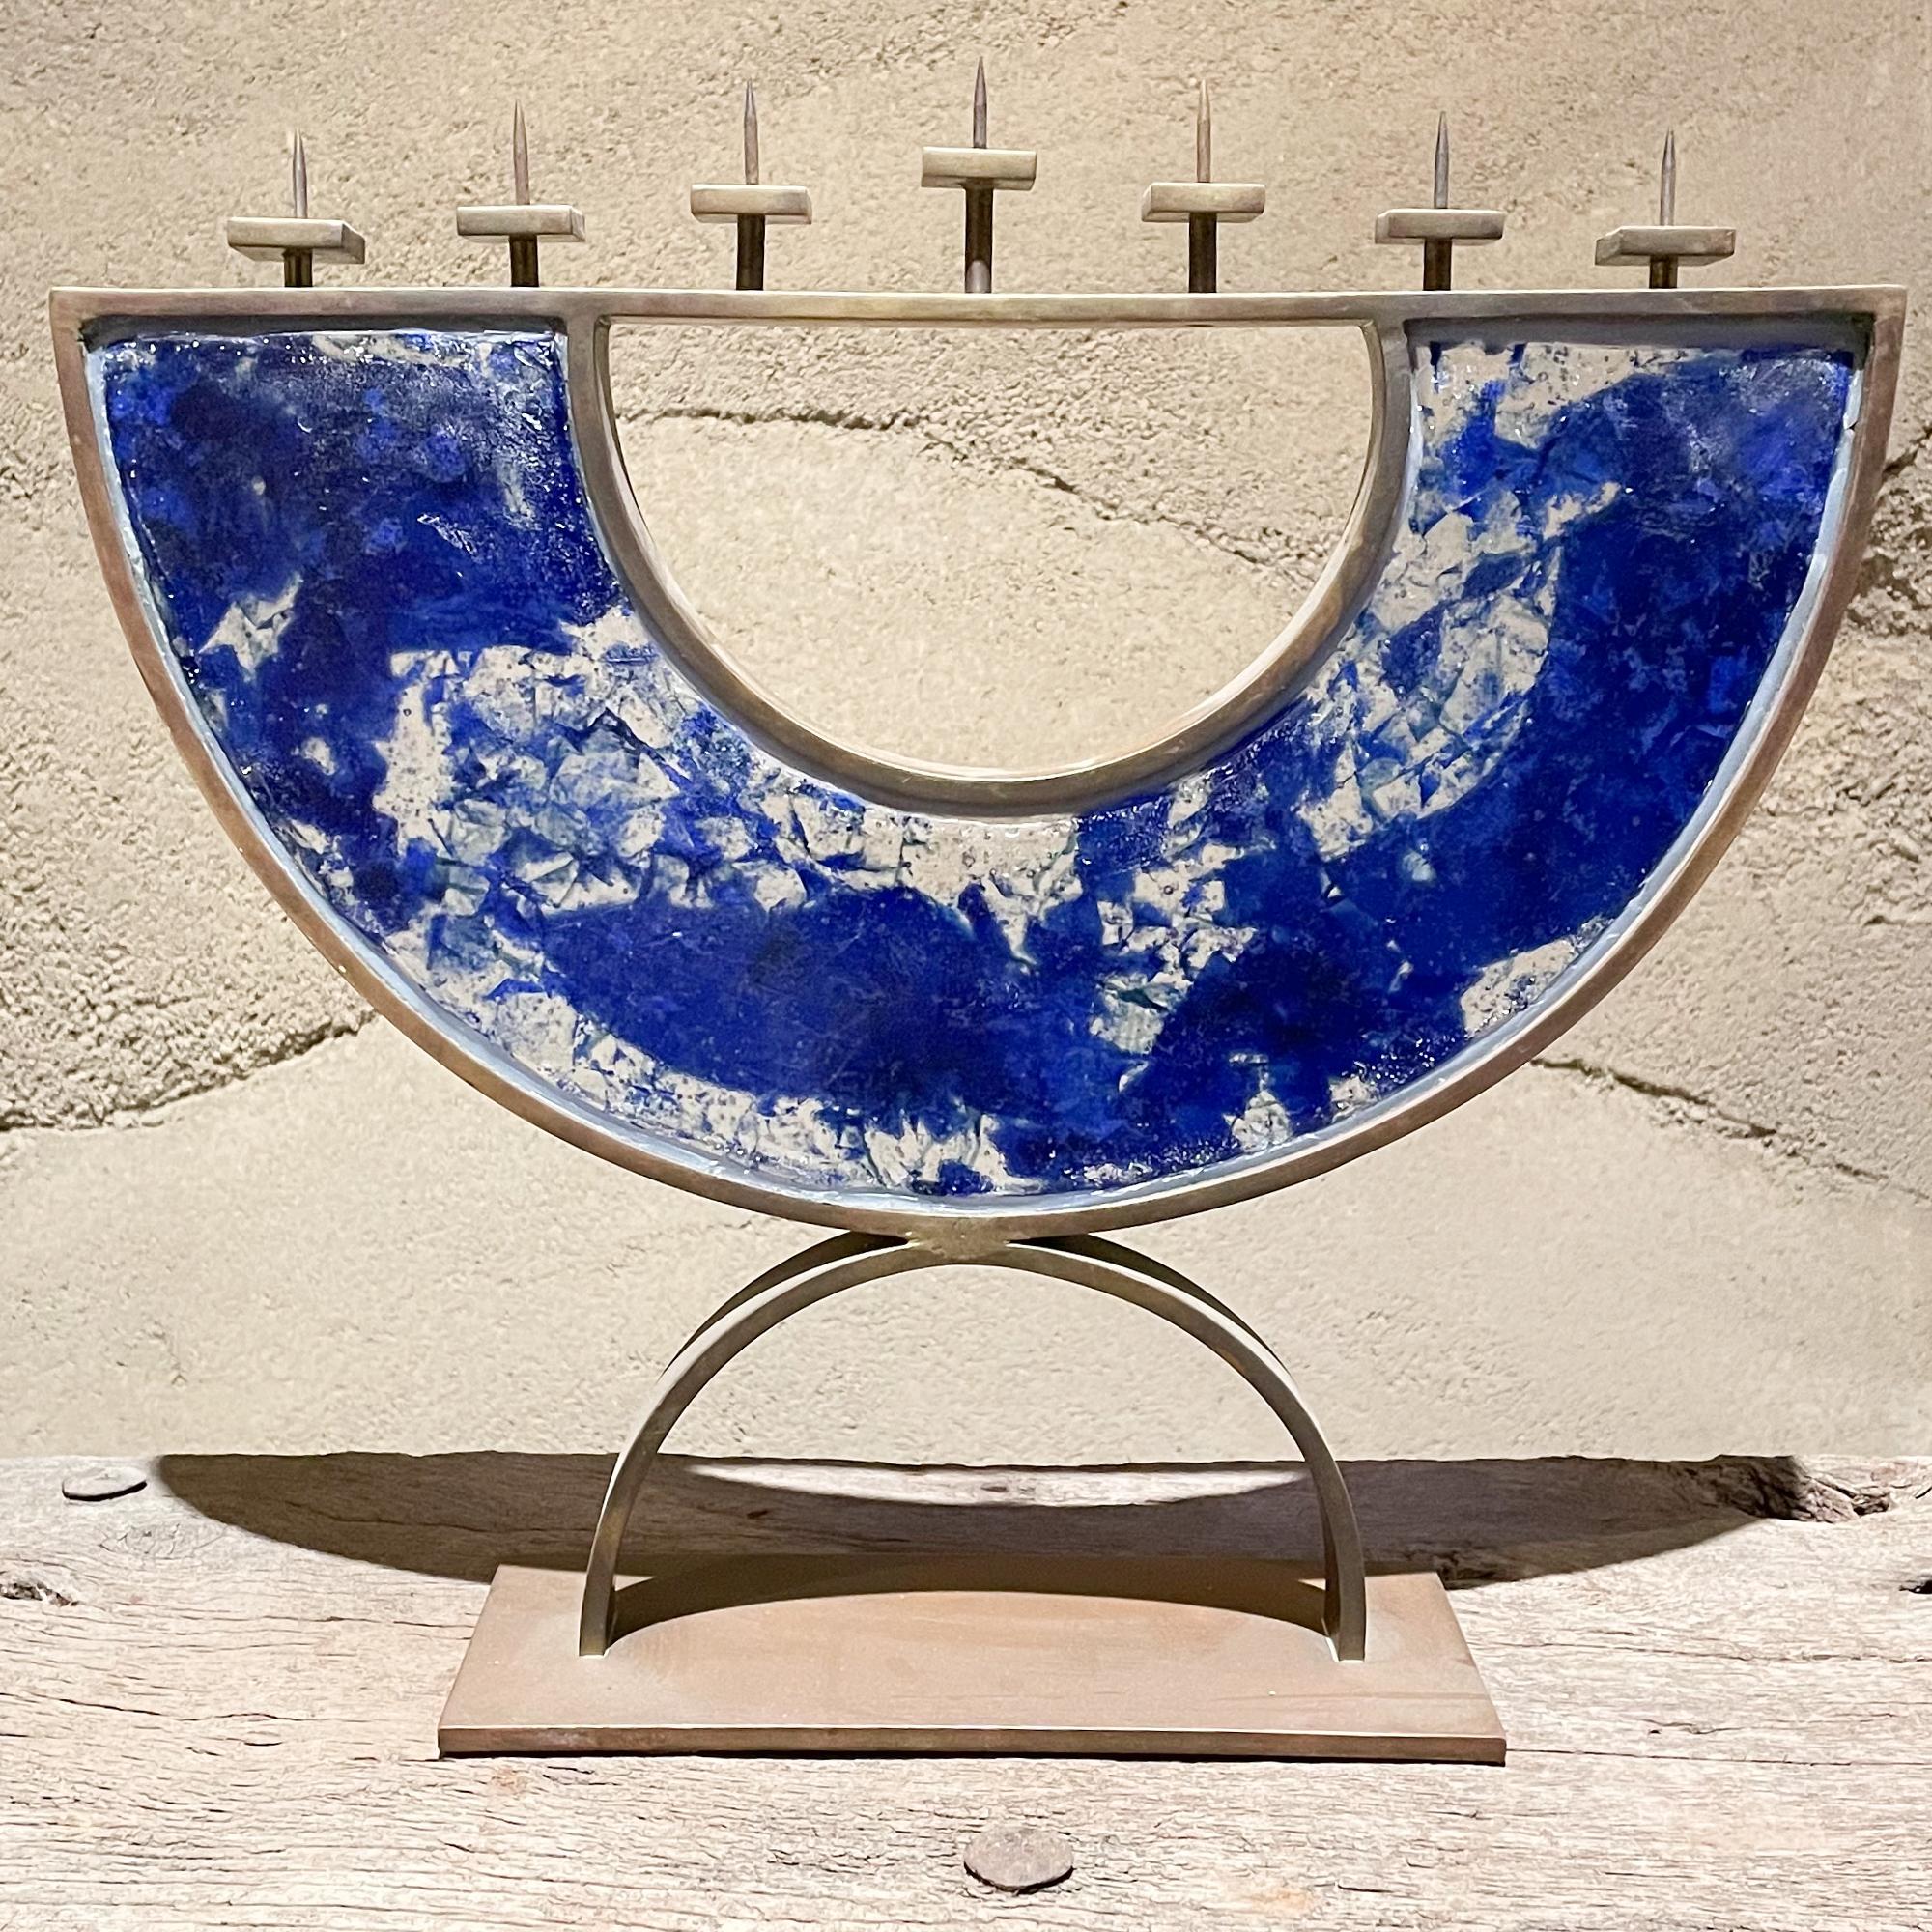 Jerusalem Sea seven candle Jewish Menorah in blue fused glass
Signed by artist. 
Art glass and bronze
25.25 T x 16.5 W x 4 D inches
Very good original condition. 
Refer to images please.



  